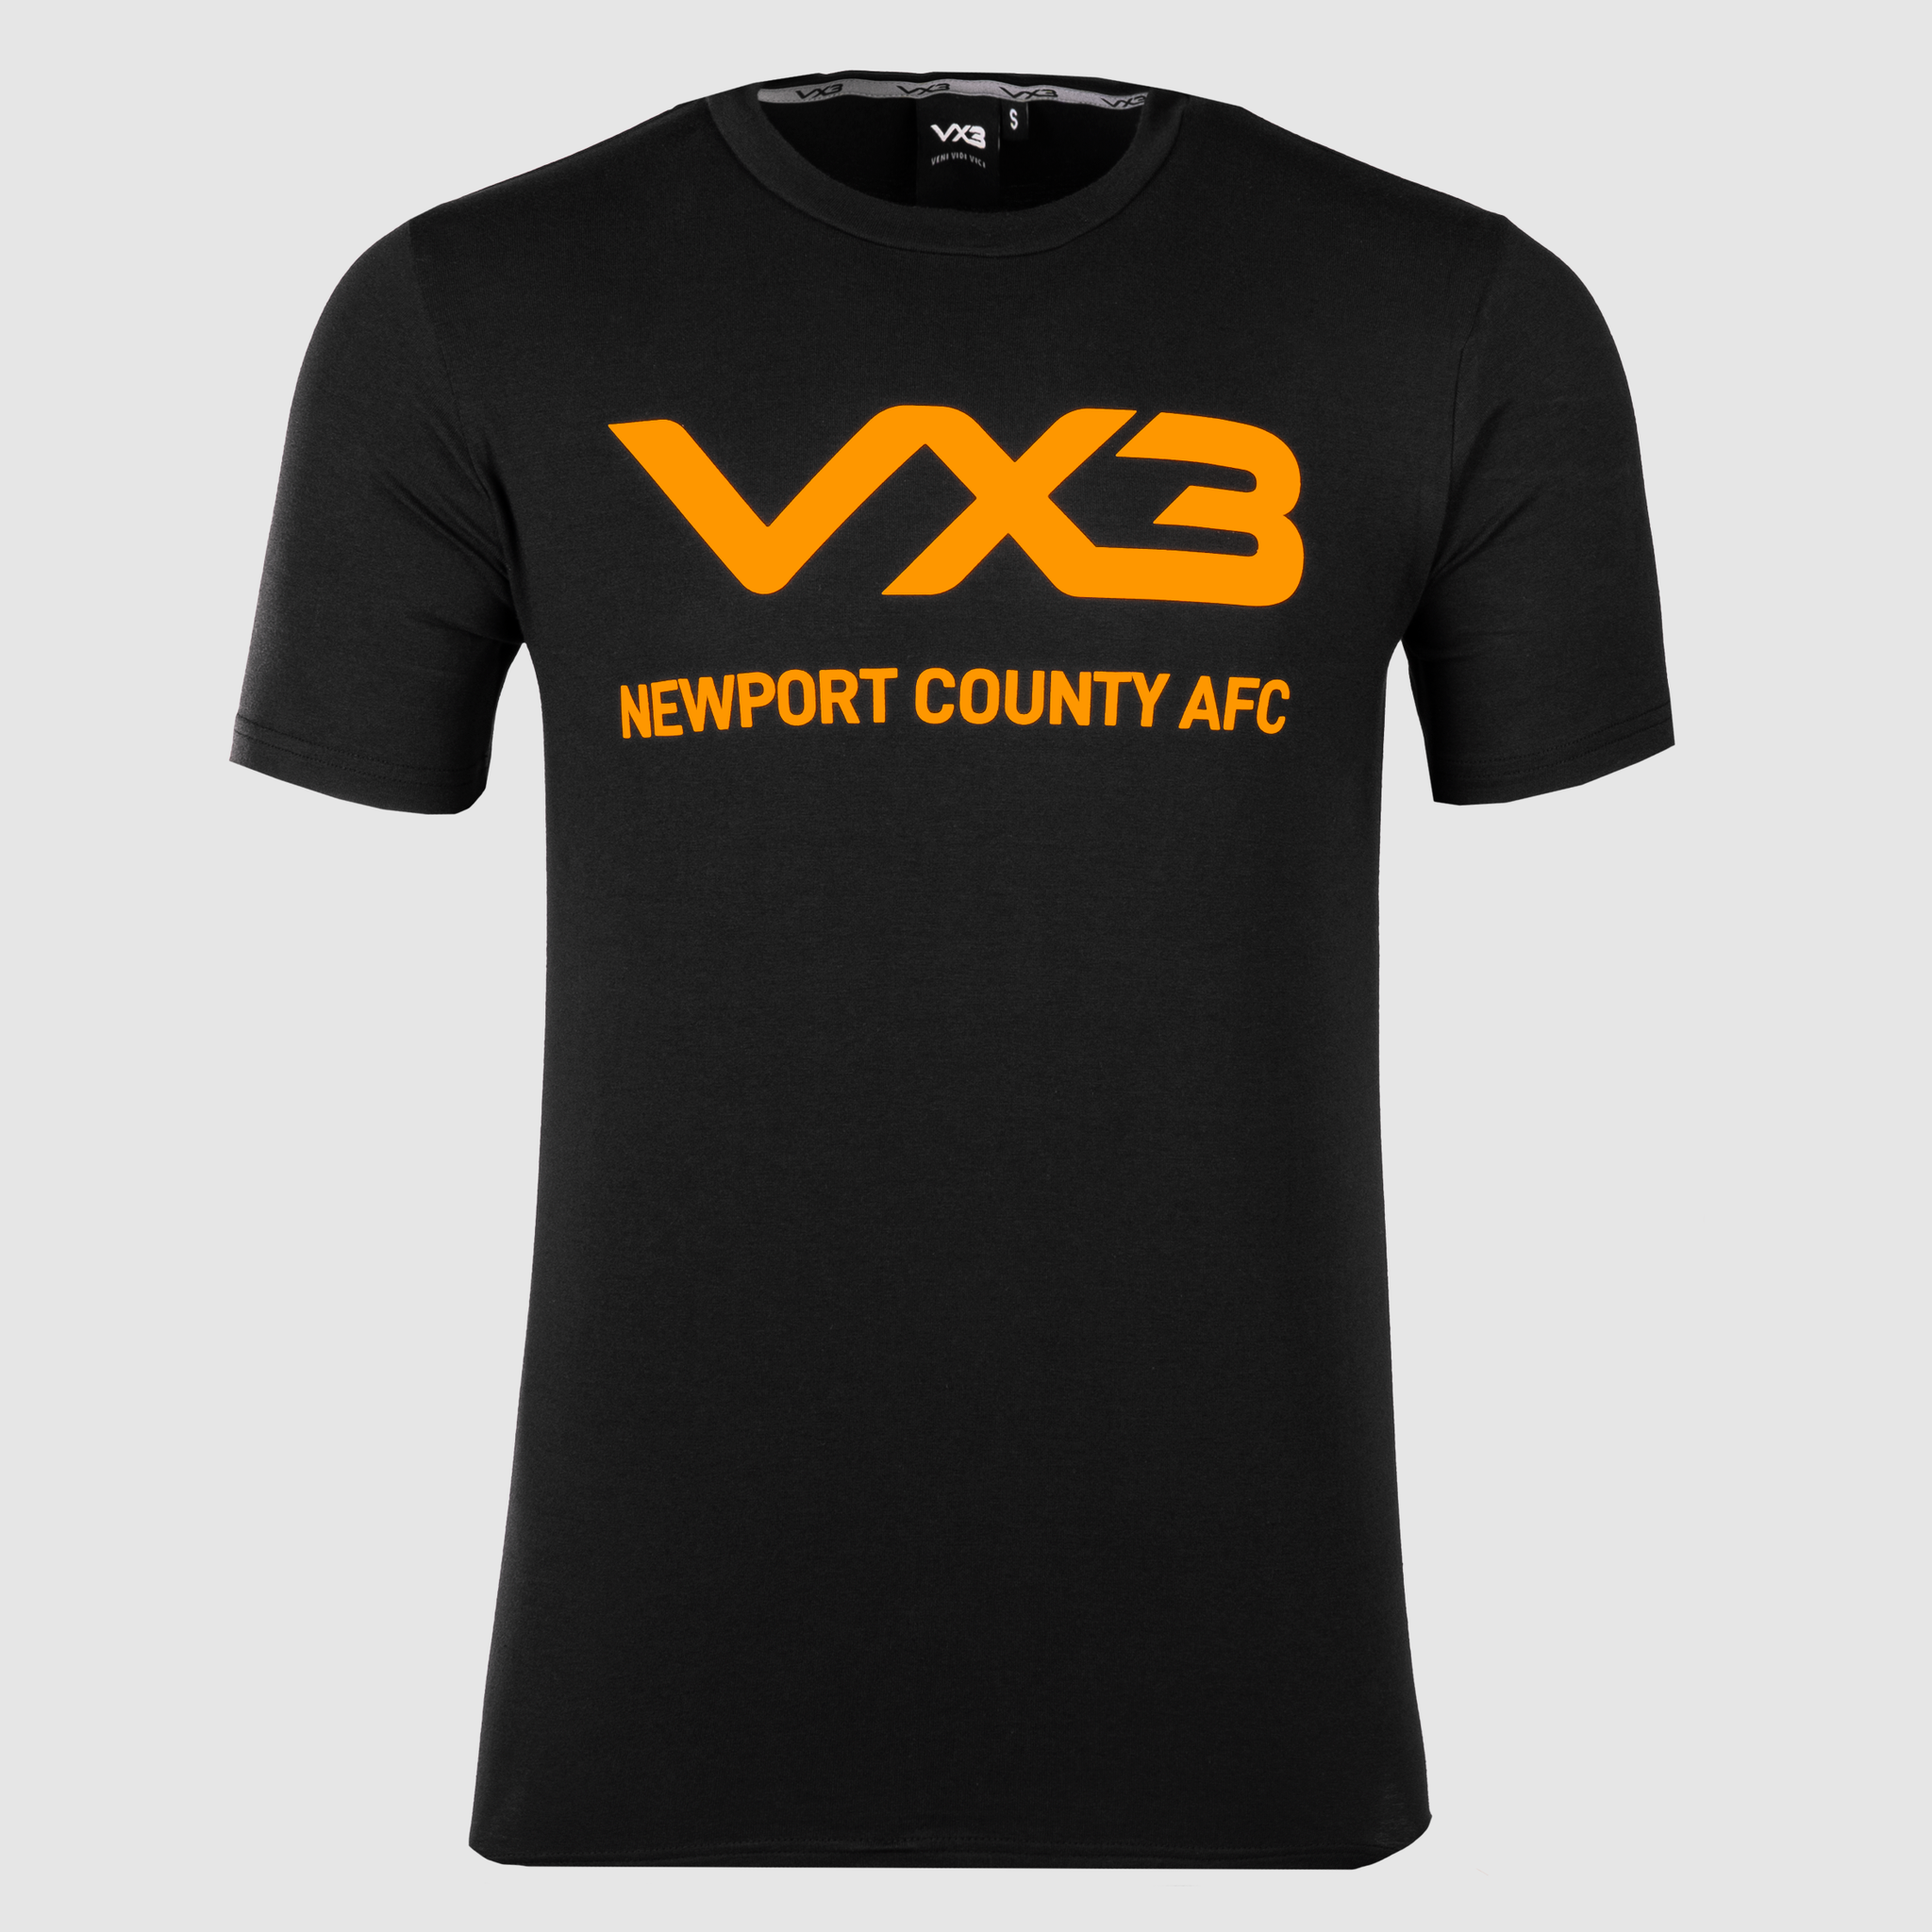 Newport County AFC Invicta Tee 23/24 Youth